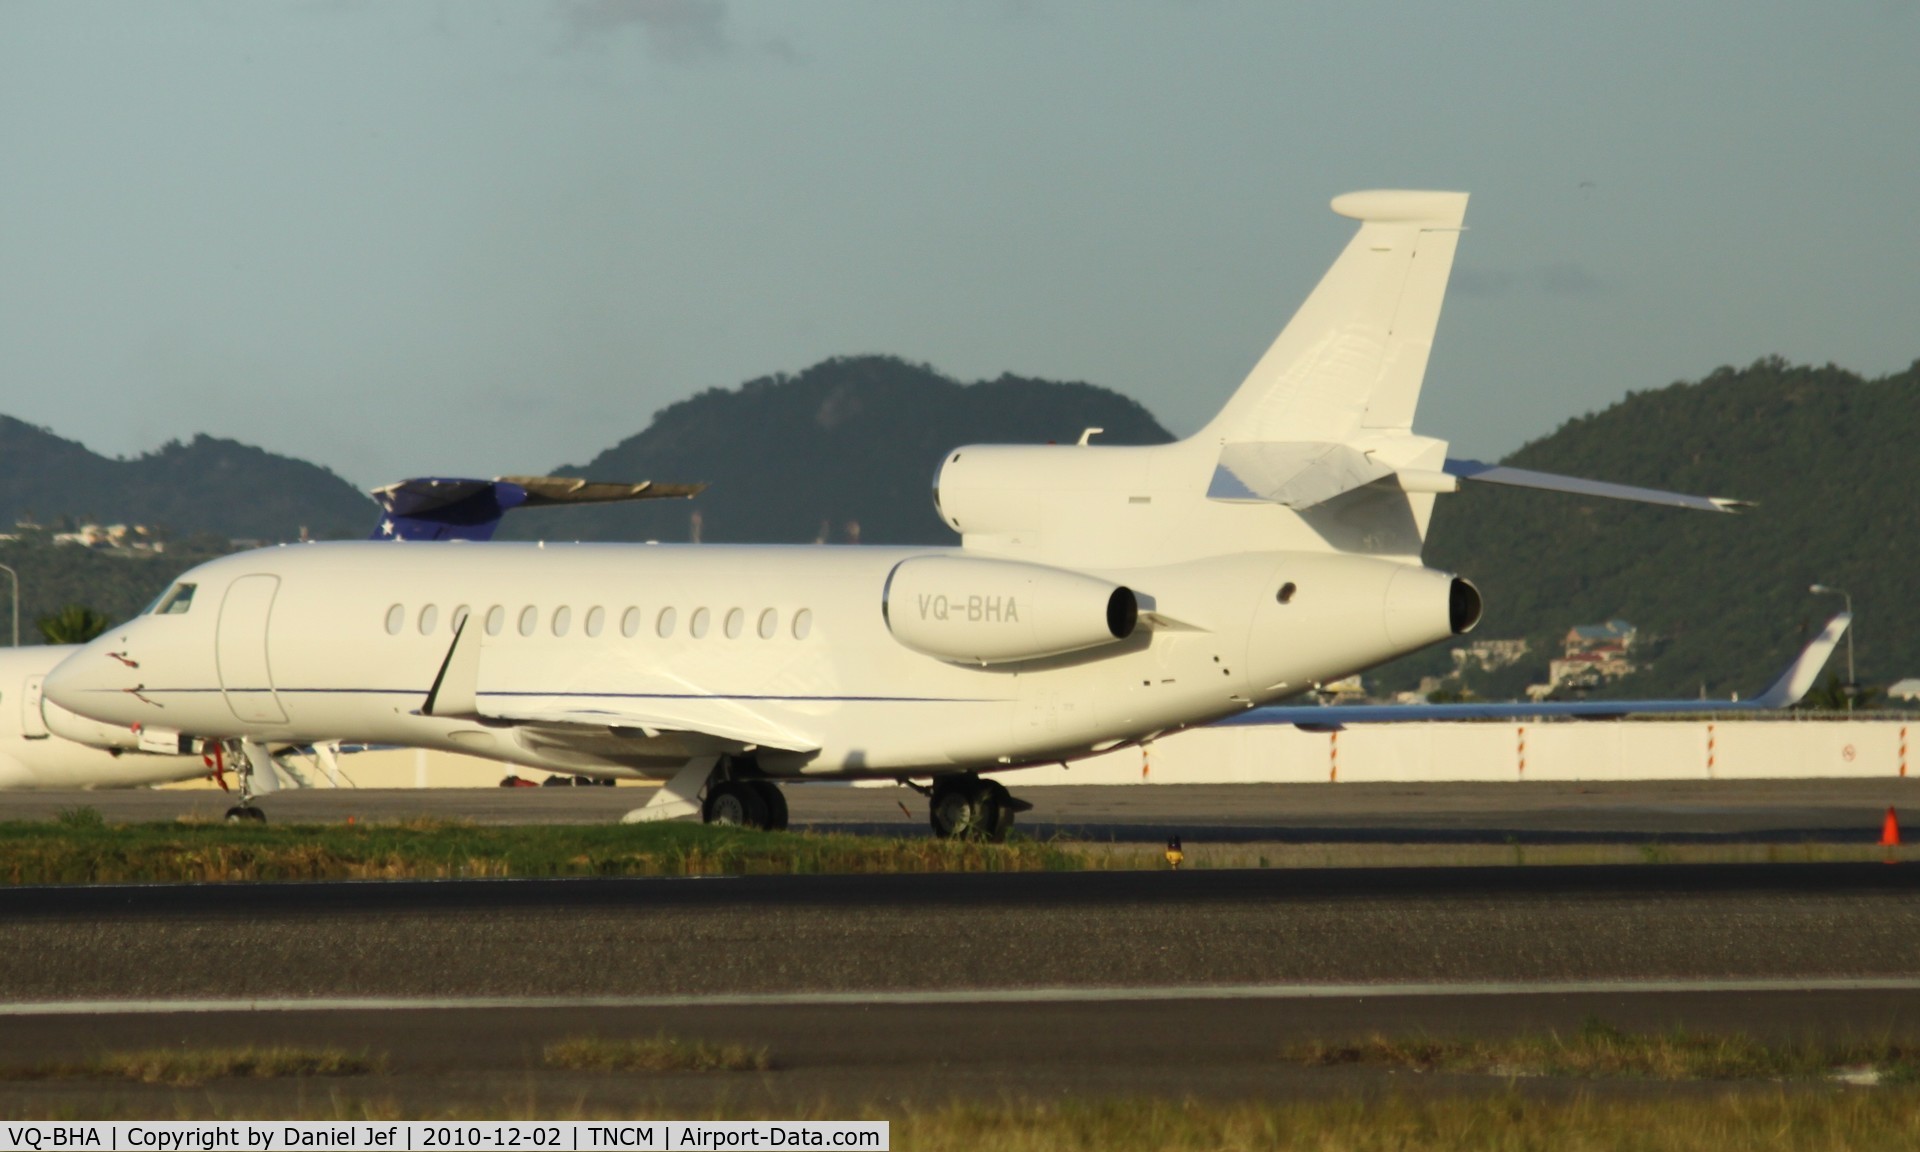 VQ-BHA, 2009 Dassault Falcon 7X C/N 84, VQ-BHA park on the ramp next to the fuel station and the blass wall at TNCM.